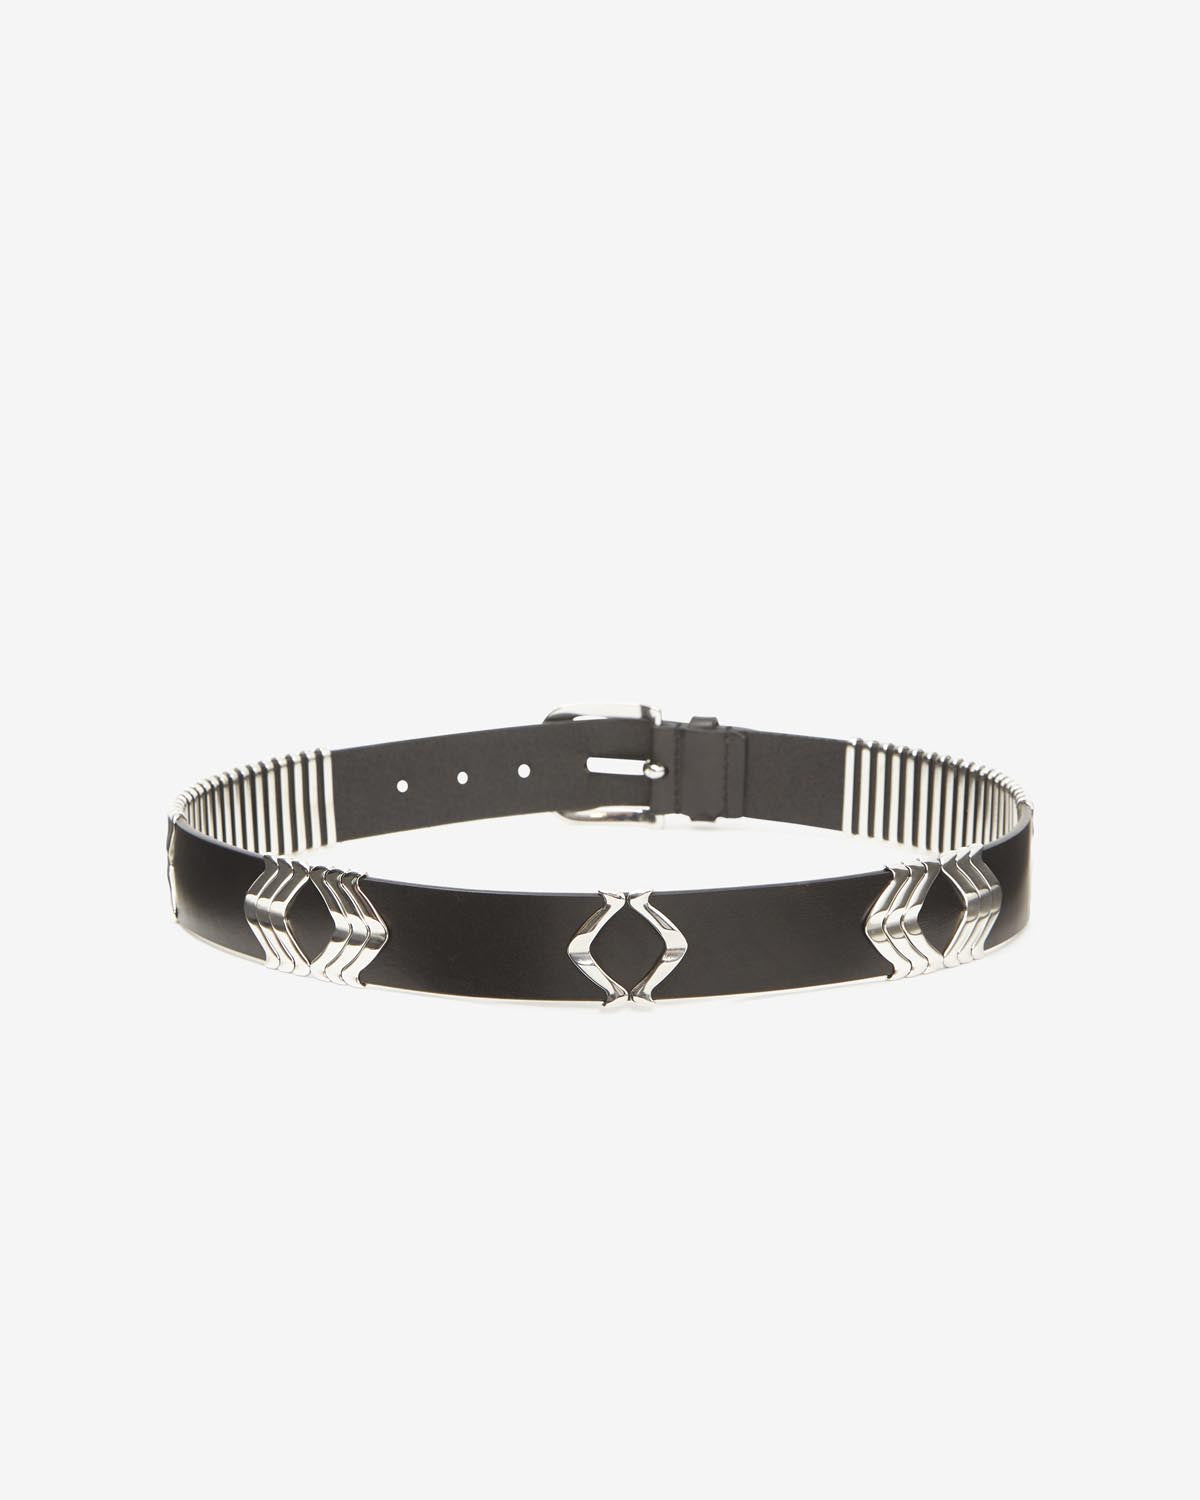 Tehora belt Woman Black and silver 6